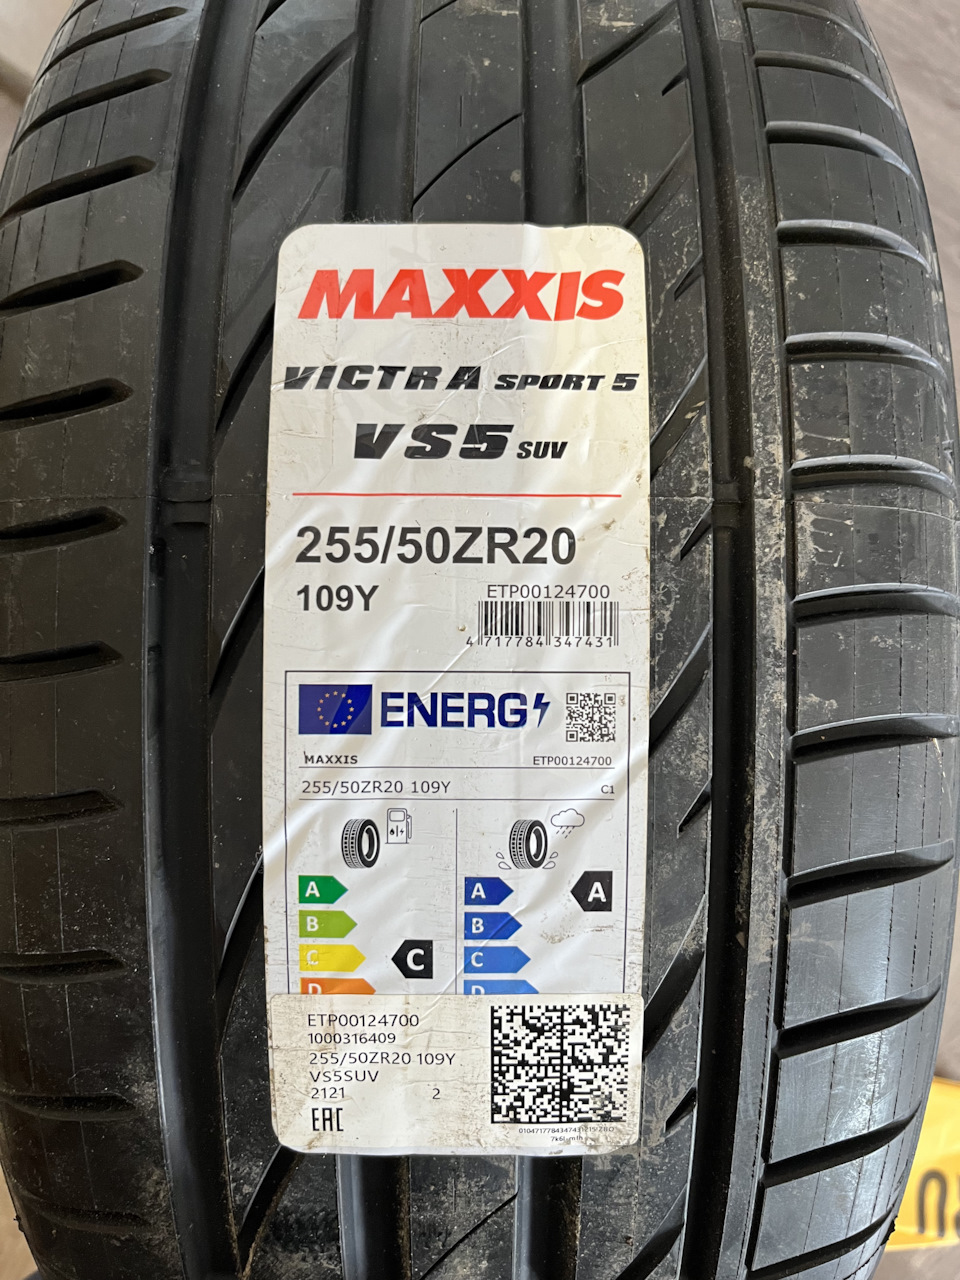 Maxxis Victra Sport 5. Максис vs5 Victra. Maxxis Victra Sport vs5. Maxxis Victra Sport 5 vs5.